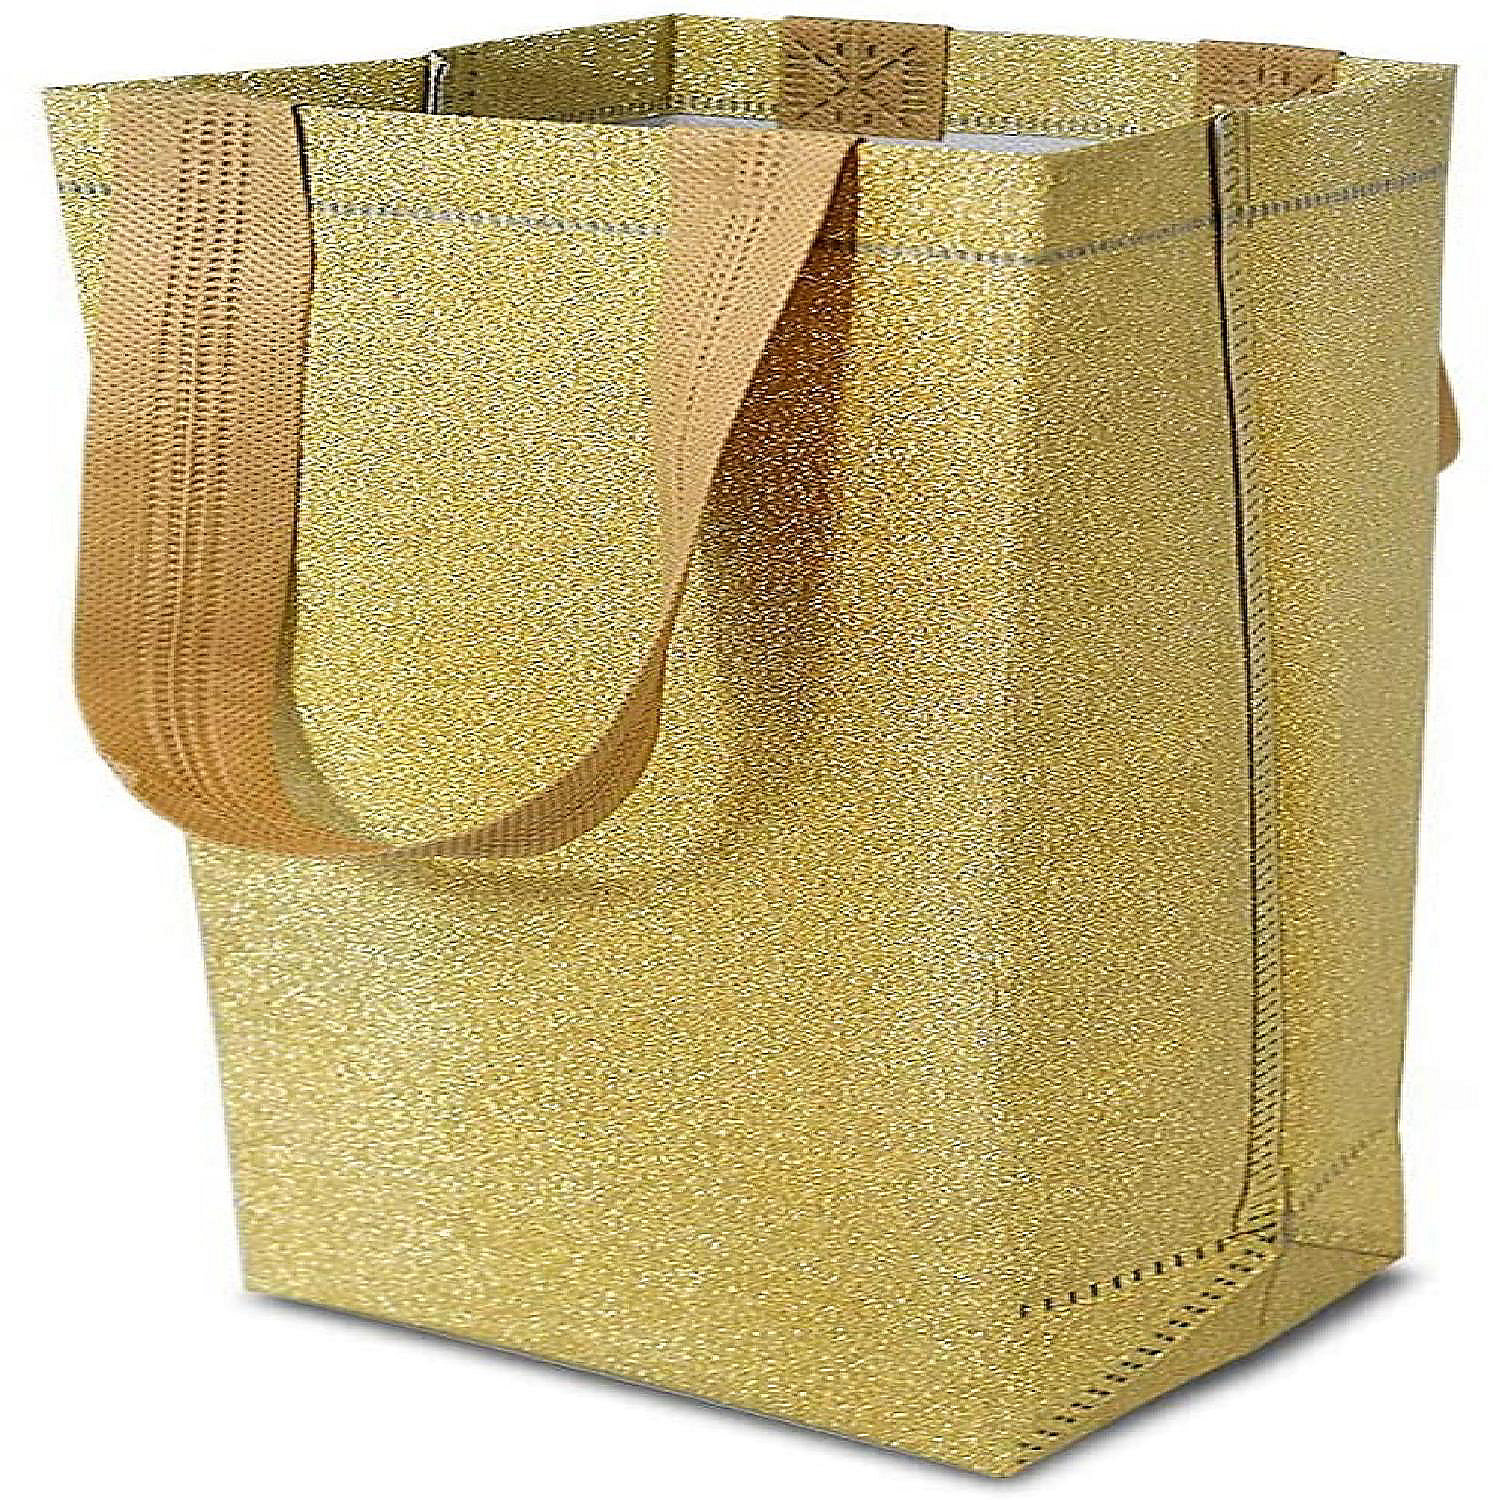 Bridesmaids Grocery Shopping Eco Friendly for Kids Birthday Parties Party Favors Gold Gift Bags 12 Pack Medium Gold Reusable Gift Bag Tote with Handles Glitter Metallic Bling Shimmer 8x4x10 